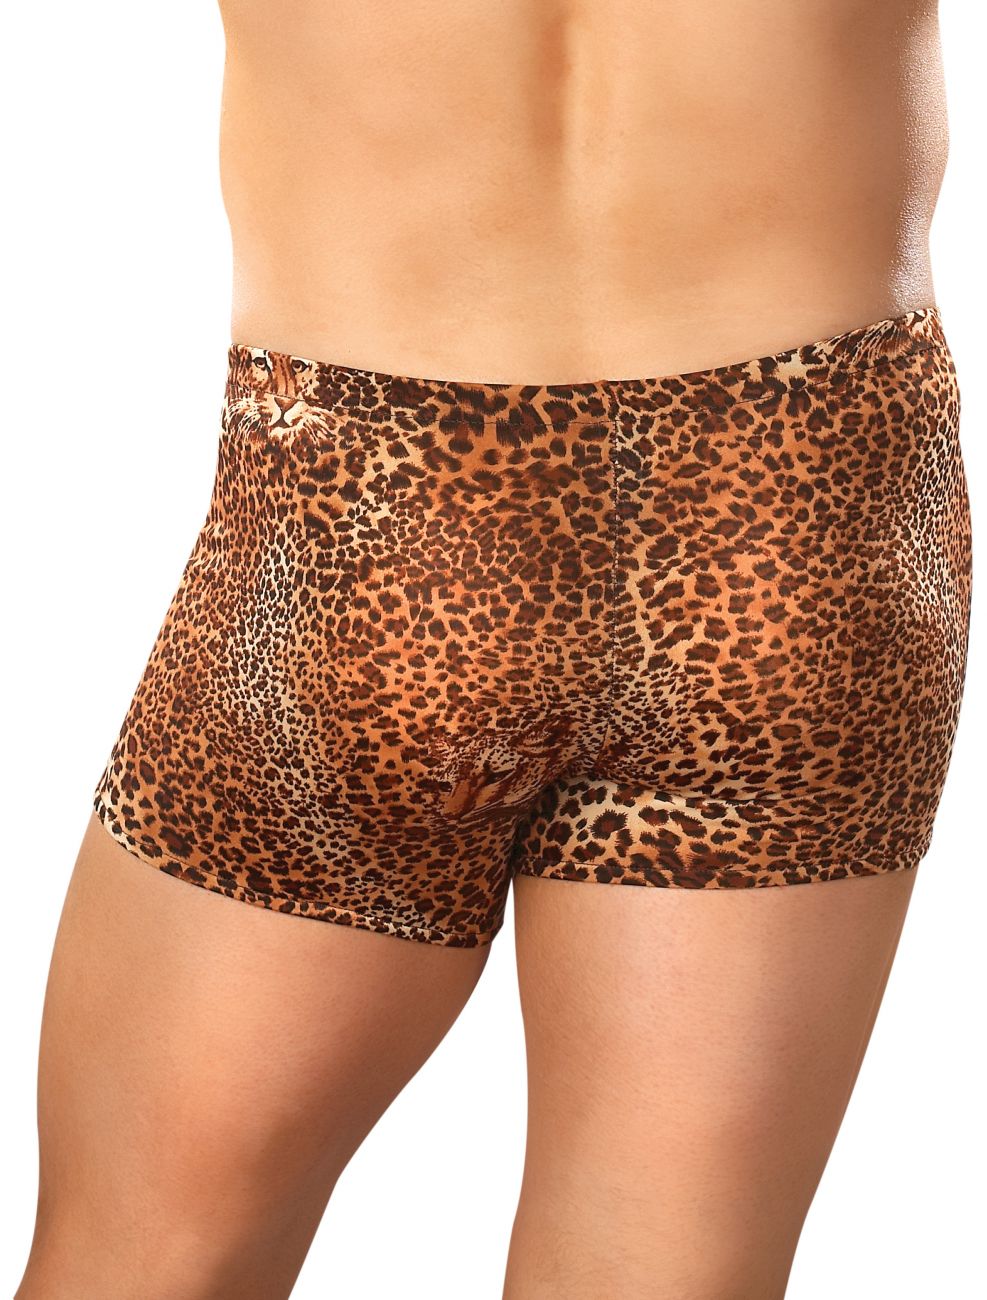 Male Power 153030 Animal Pouch Boxer Briefs